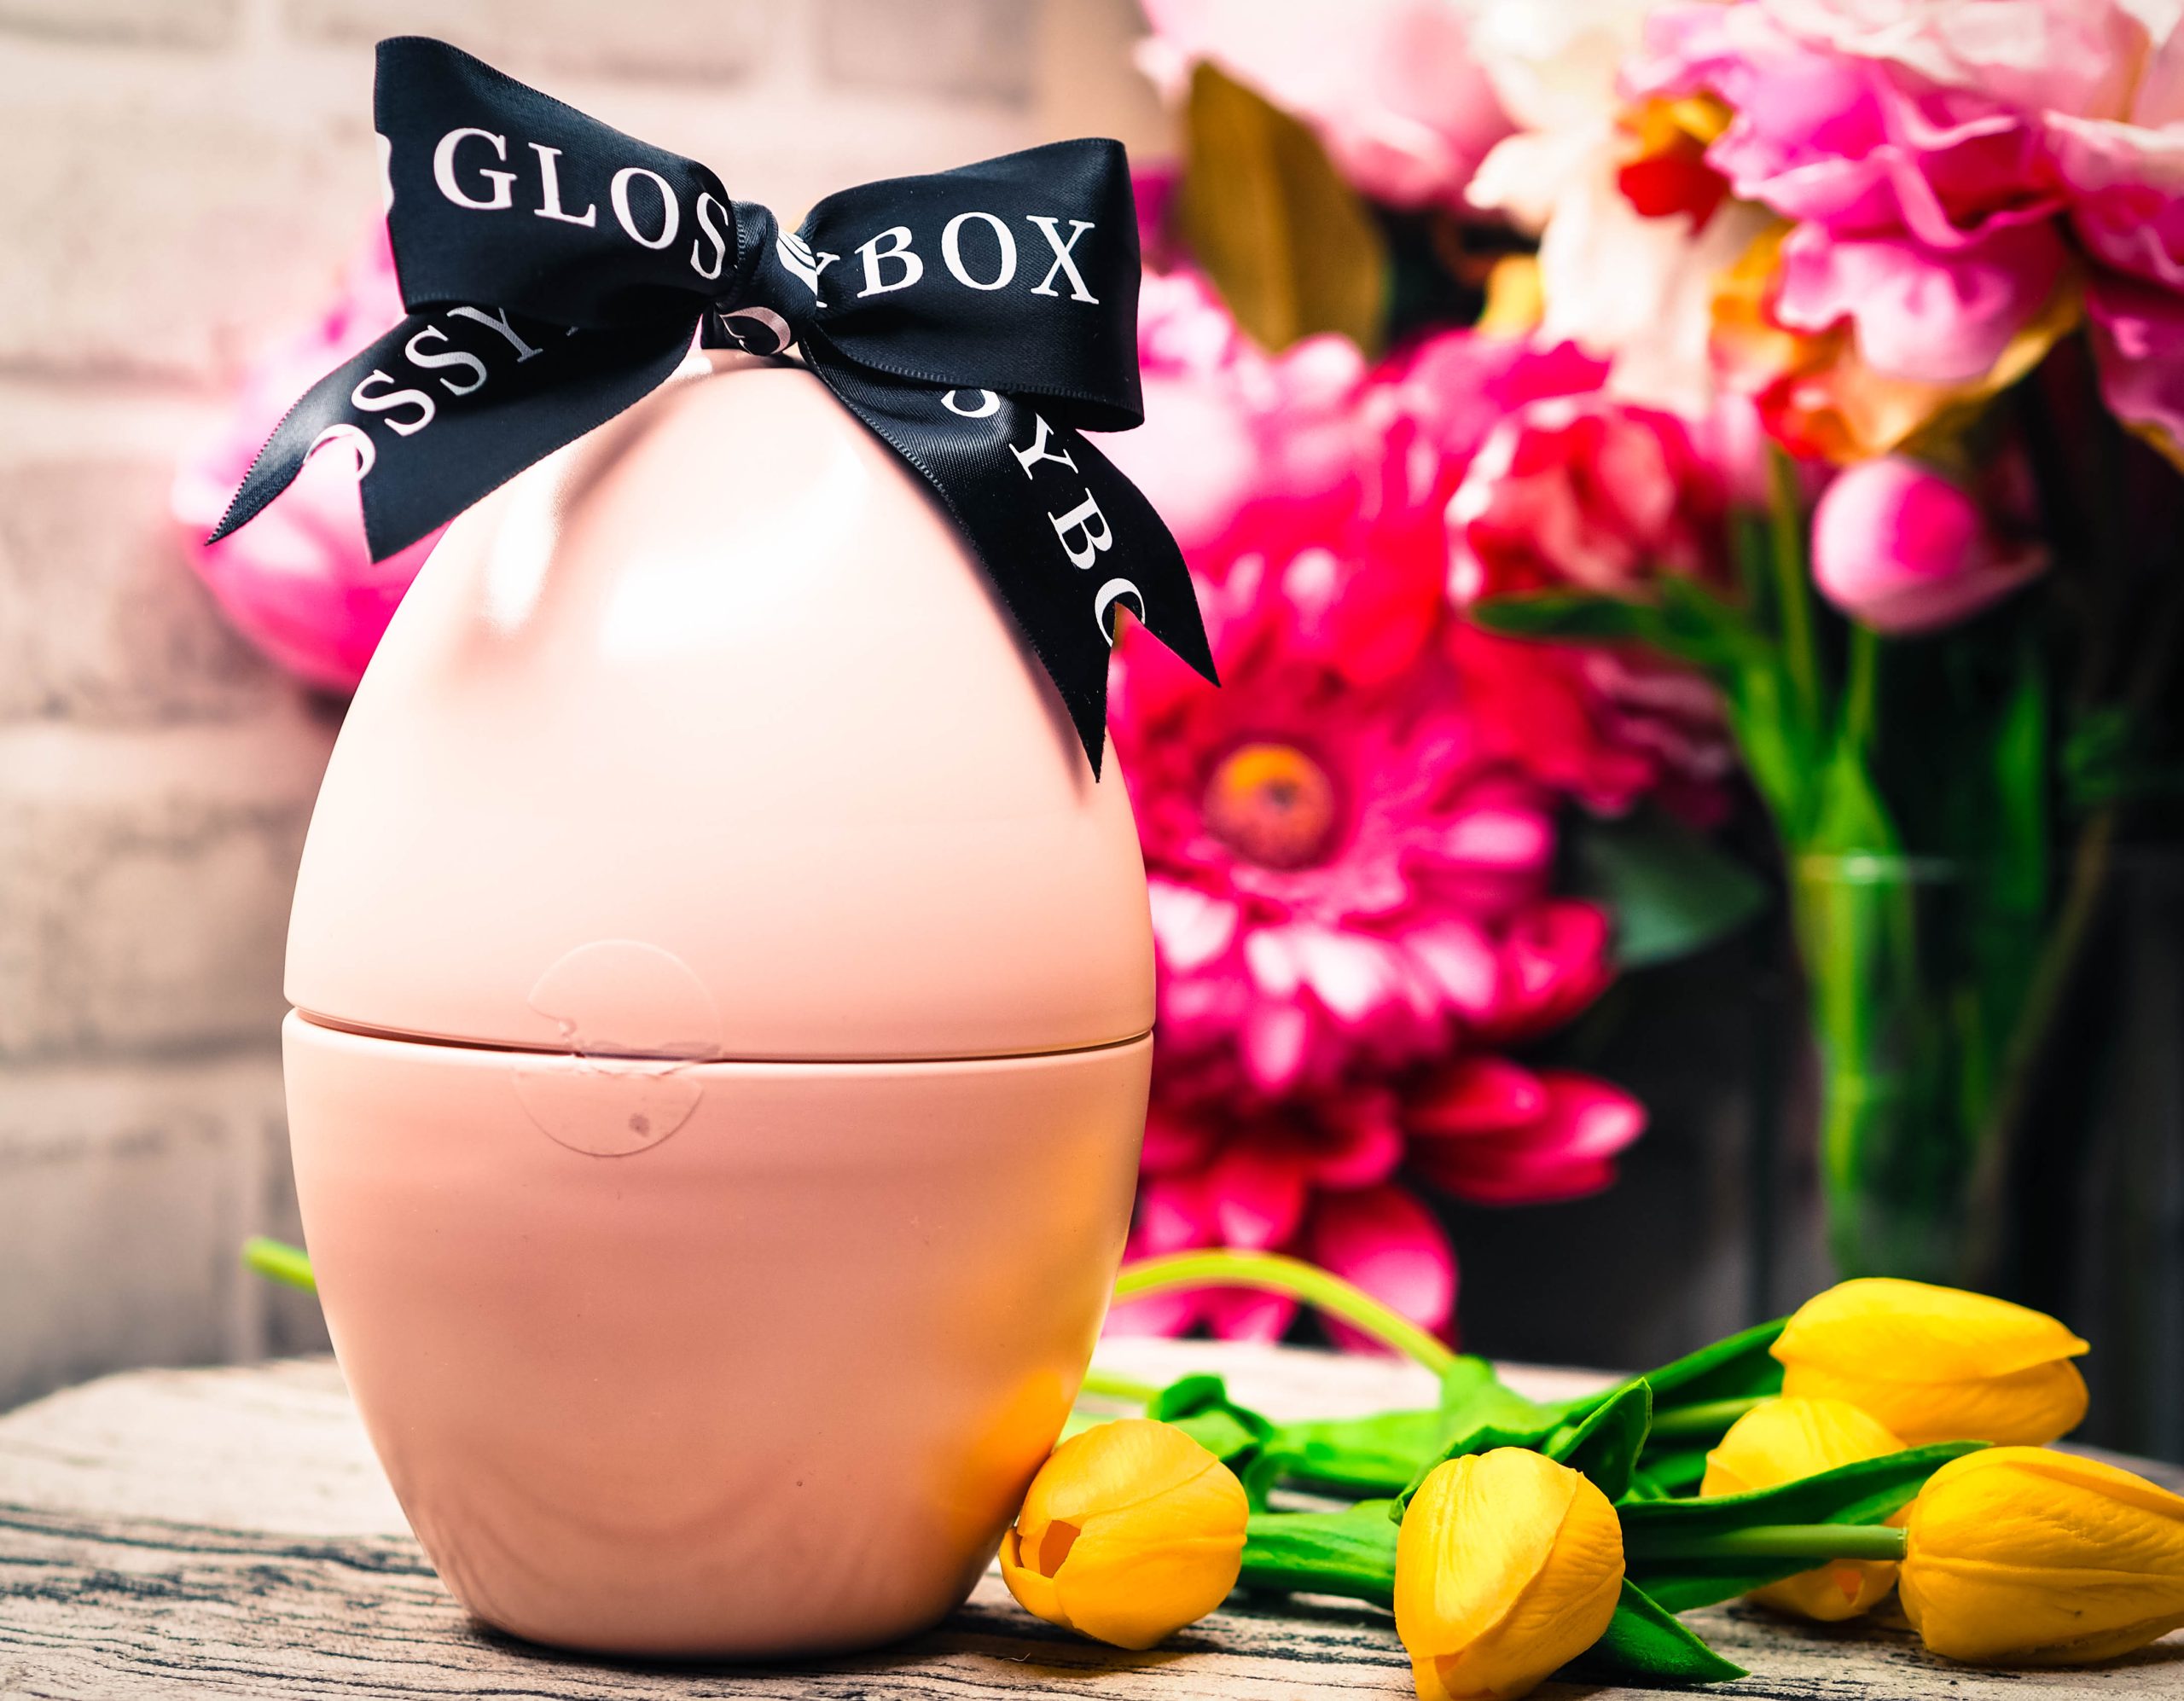 Glossybox Limited Edition Easter Egg 2019